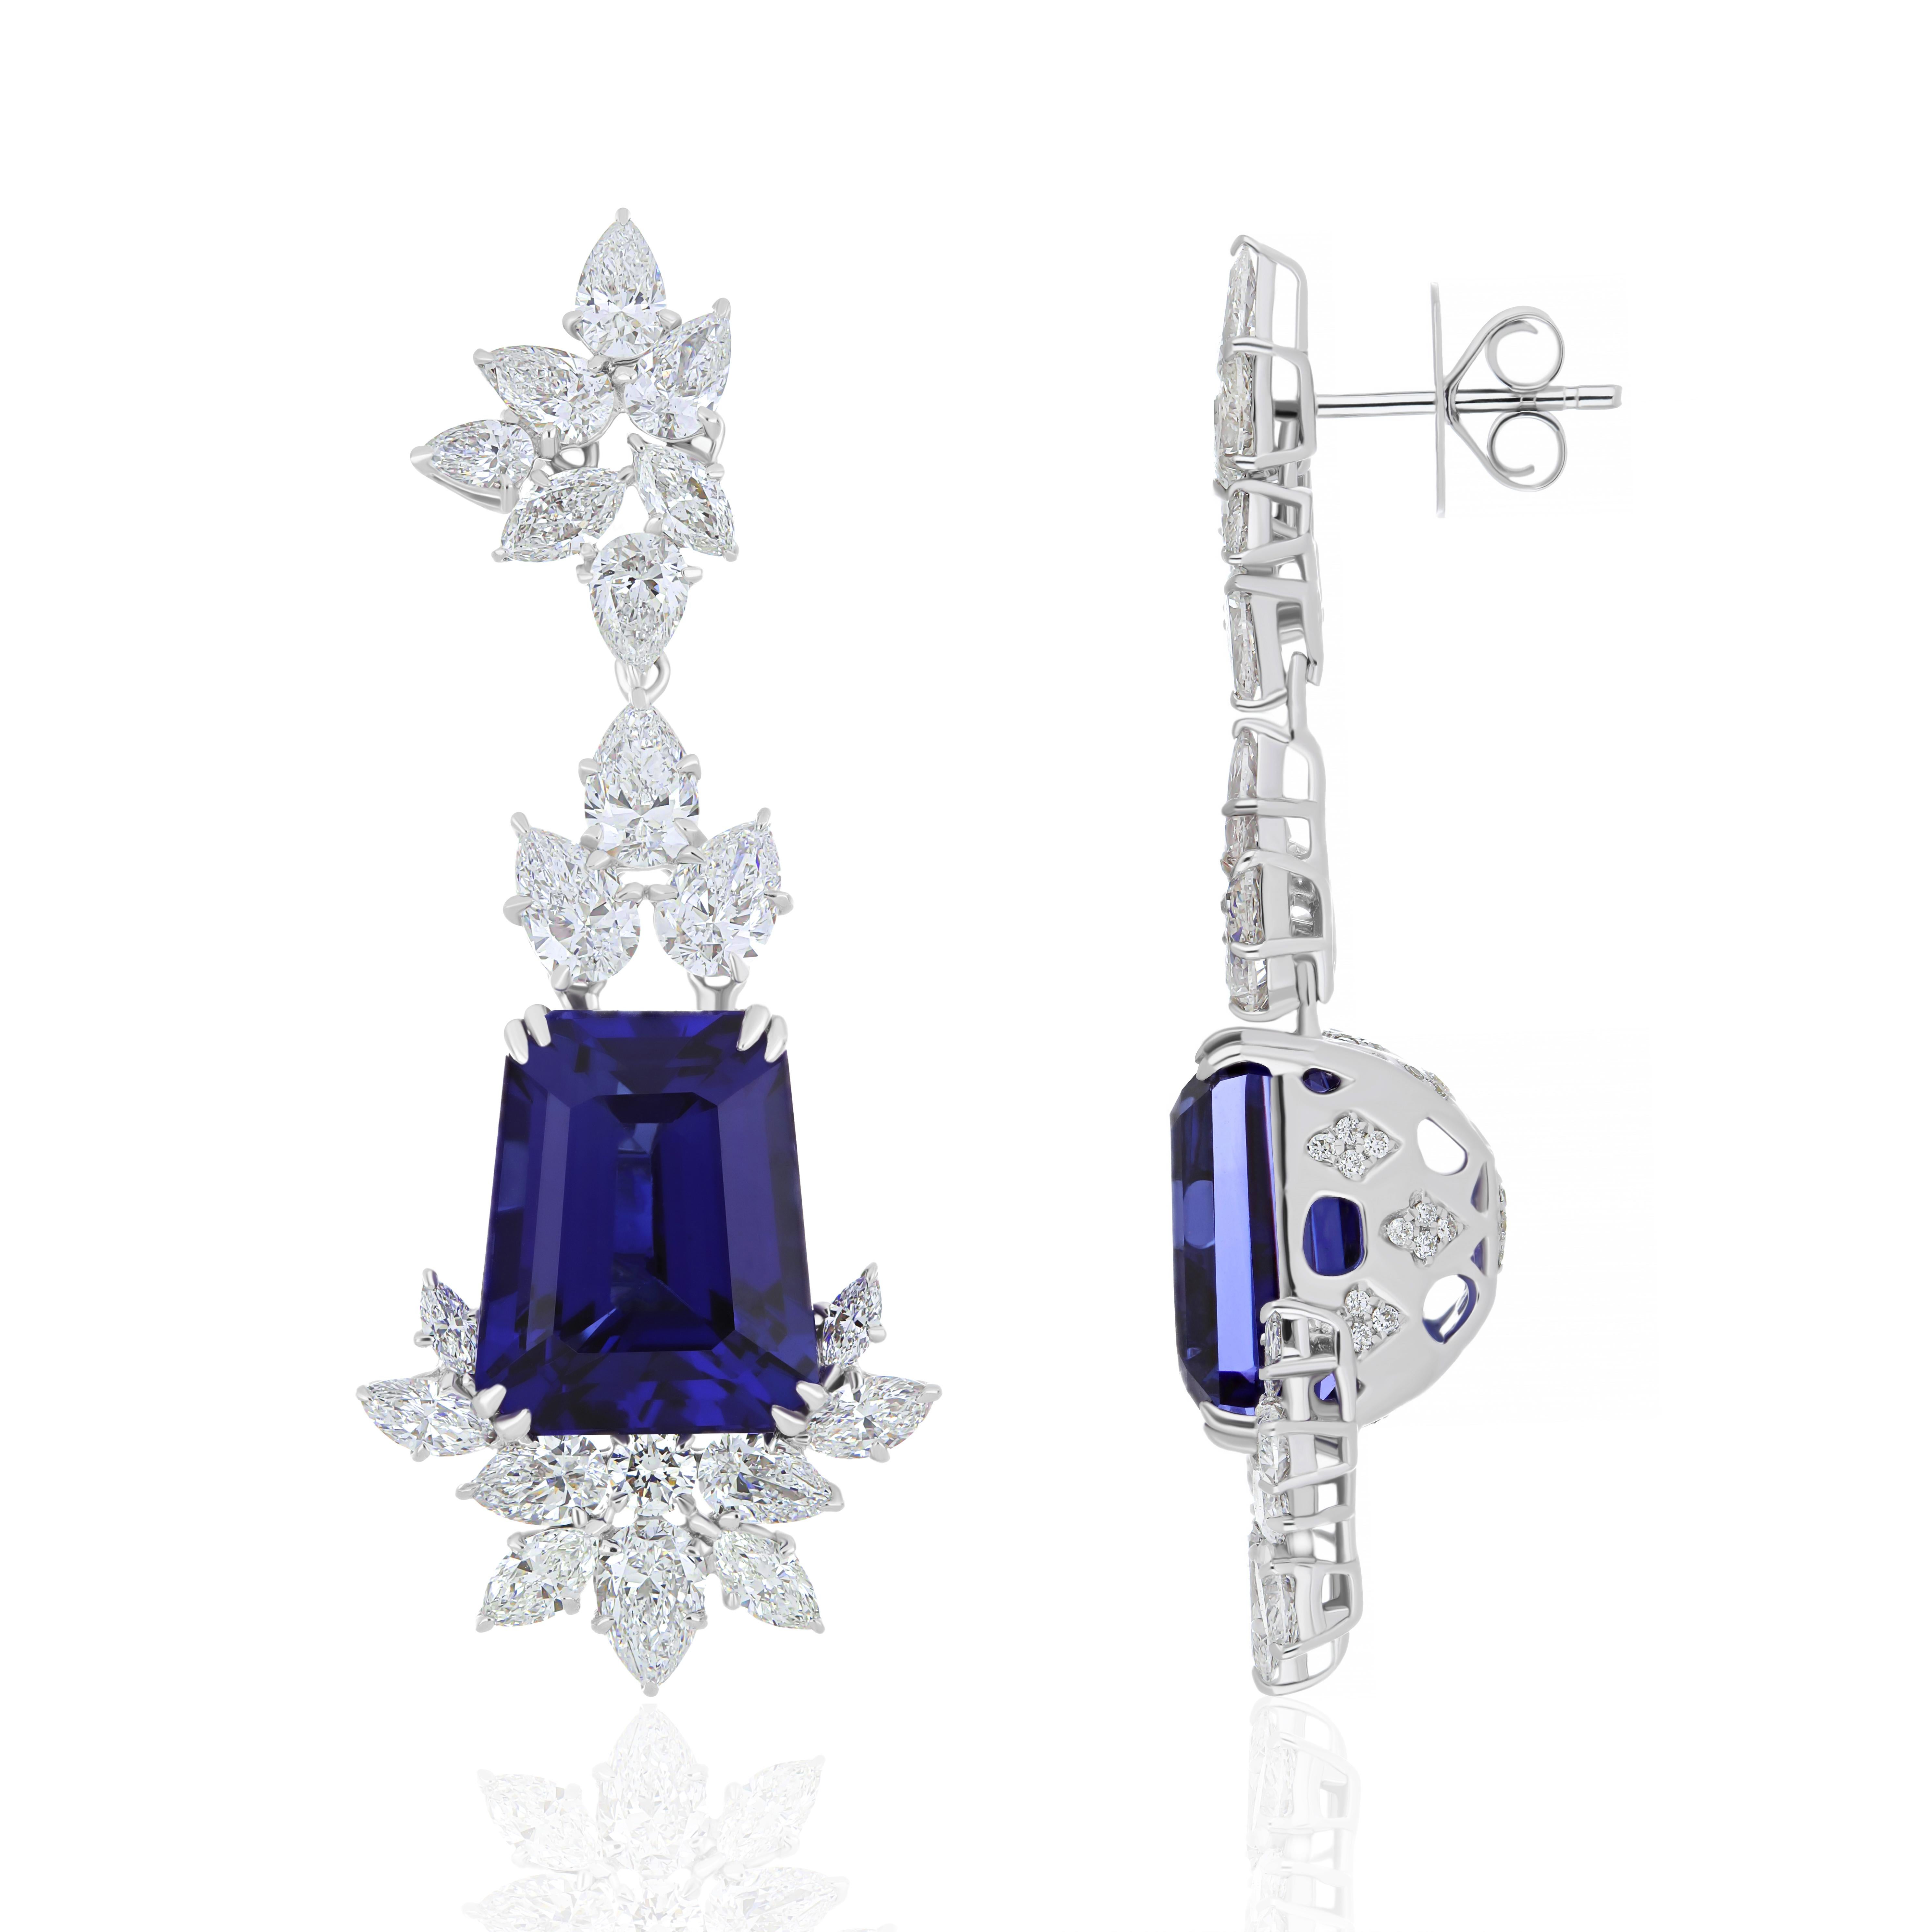 Elegant et Exquisitely detailed White Gold Earring, with 23.20 cts. (approx.) Tanzanite cut in Unique Fancy Shape accented with micro pave Diamonds, weighing approx. 7.2 cts. (approx.). total carat weight. Boucles d'oreilles en or blanc 18 carats